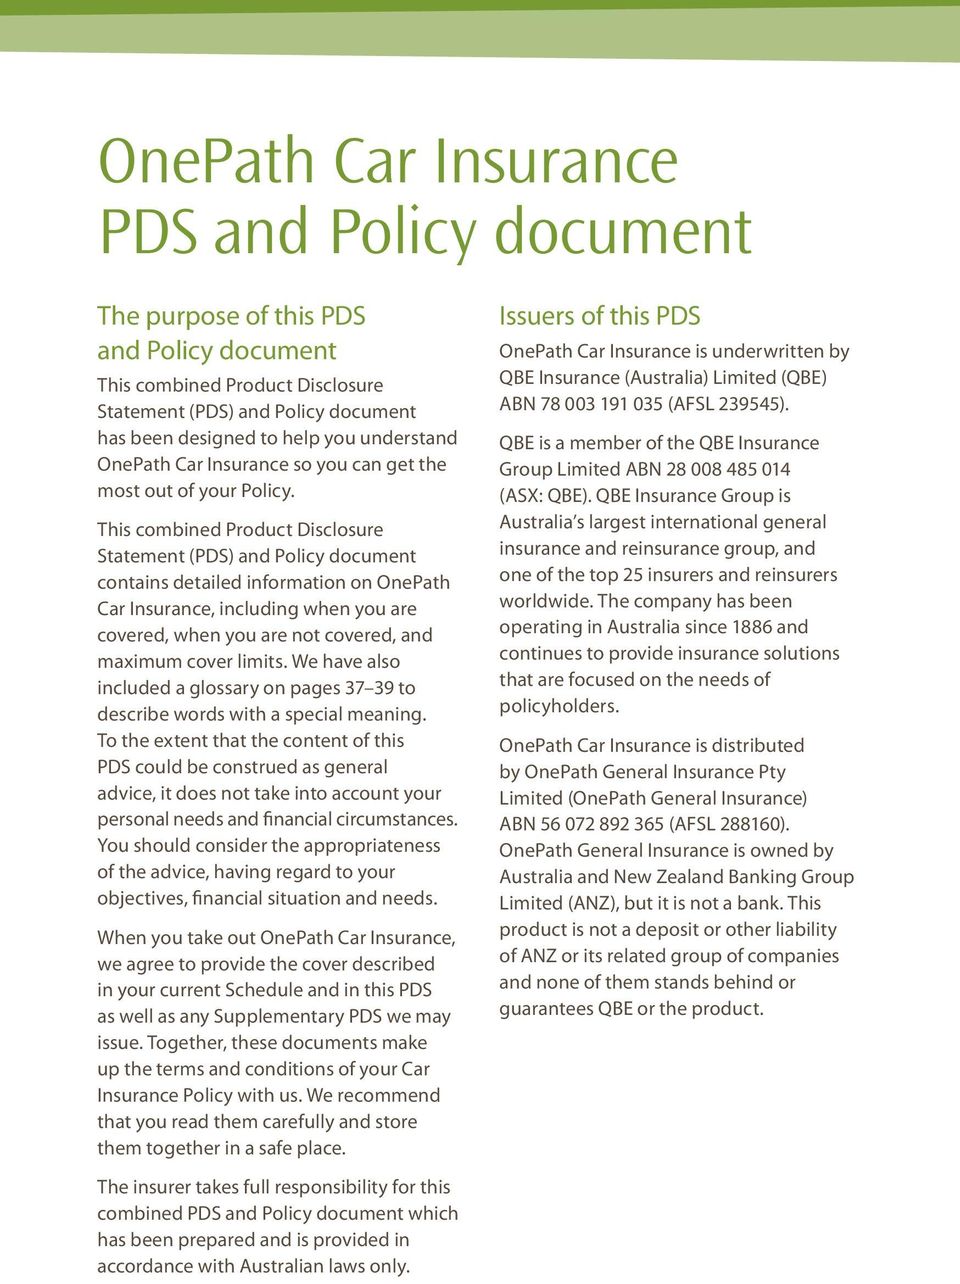 This combined Product Disclosure Statement (PDS) and Policy document contains detailed information on OnePath Car Insurance, including when you are covered, when you are not covered, and maximum